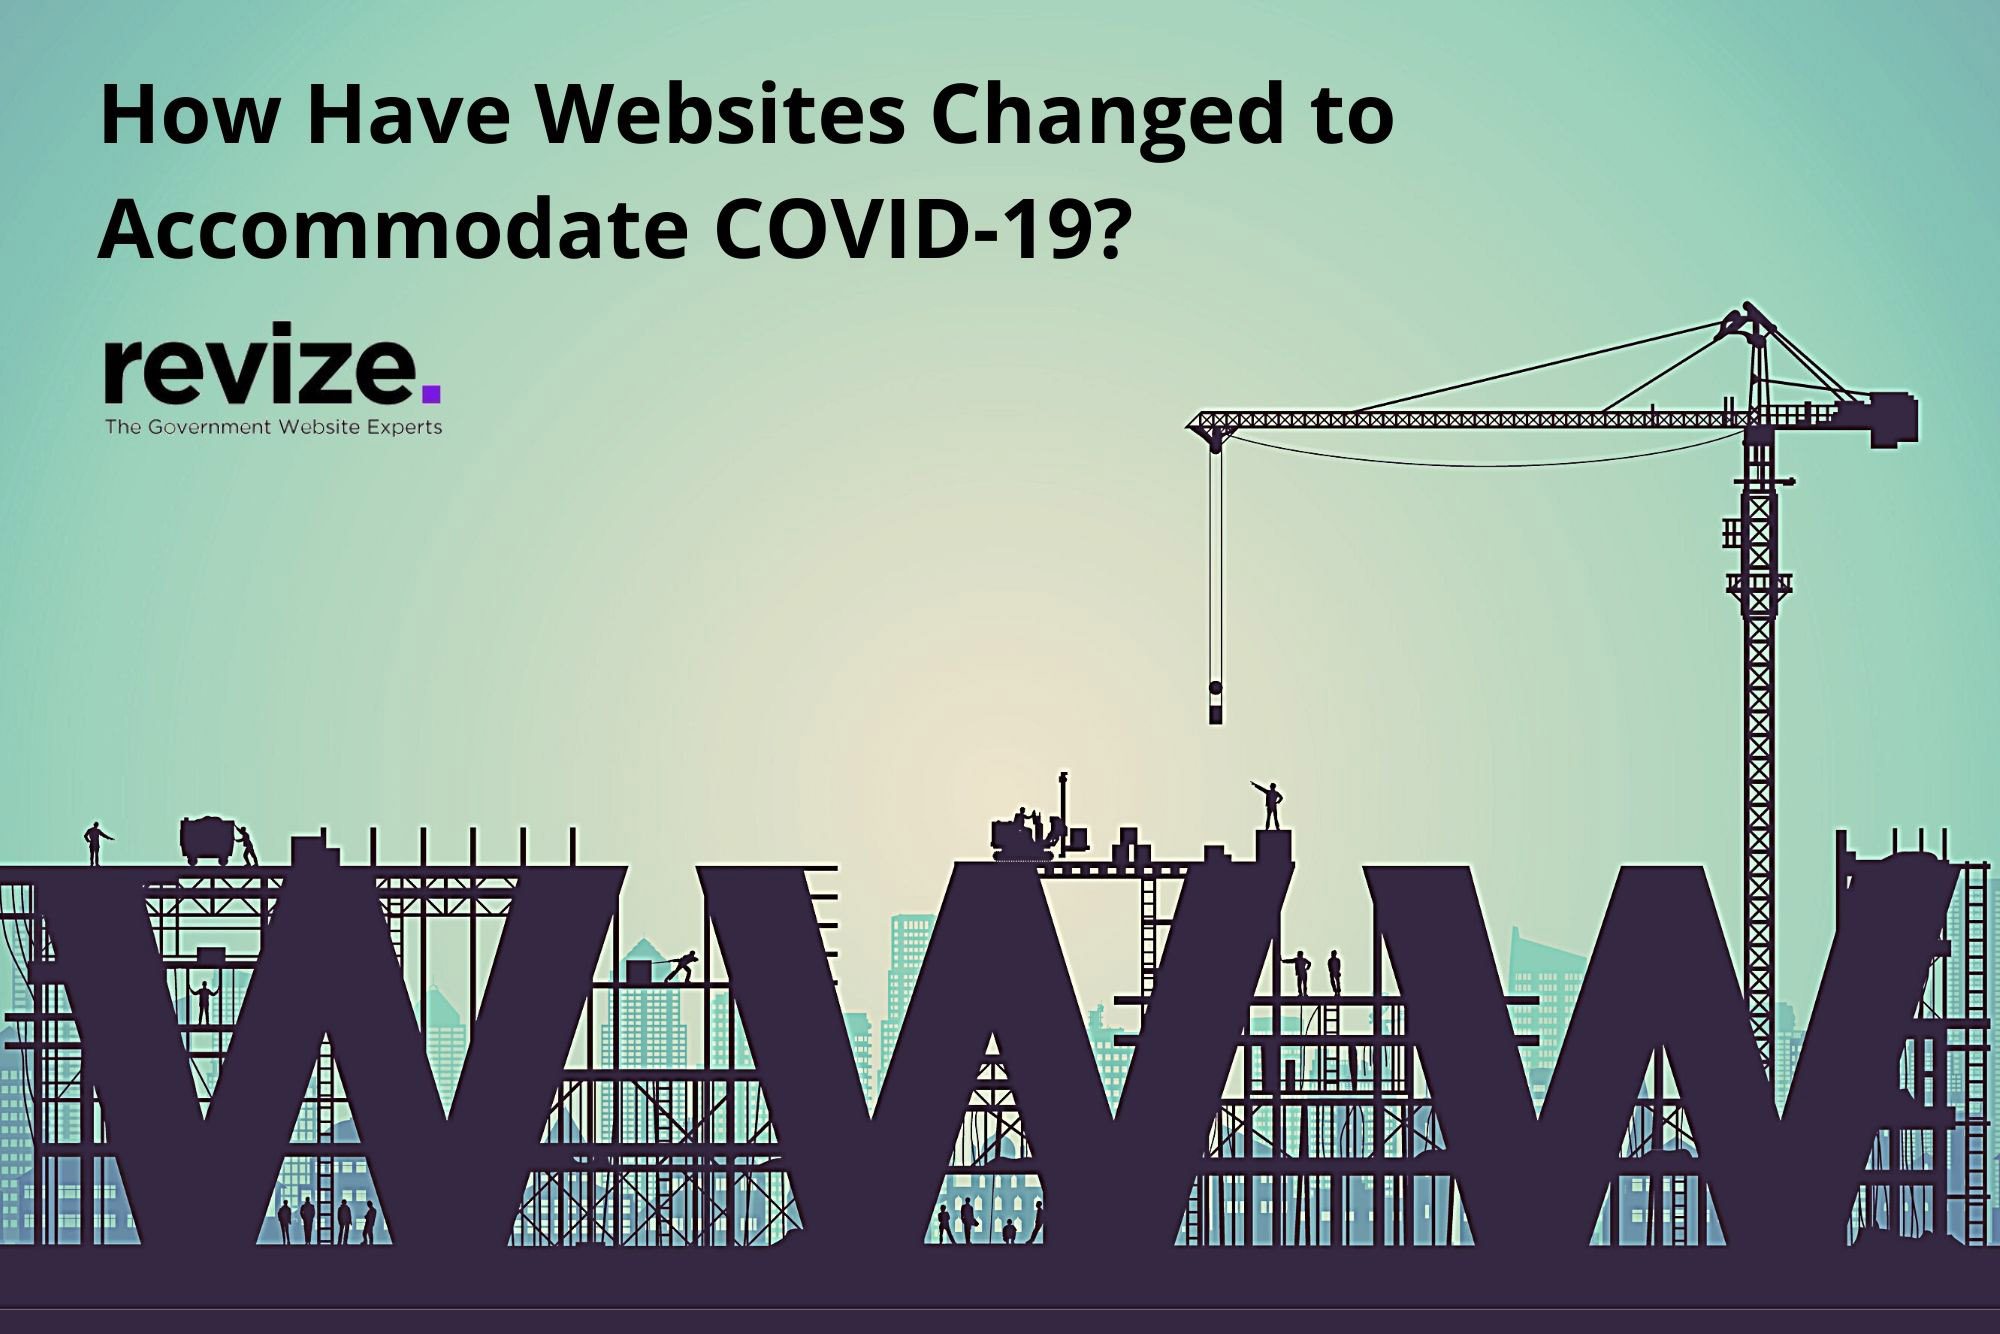 How Have Websites Changed to Accomodate COVID-19